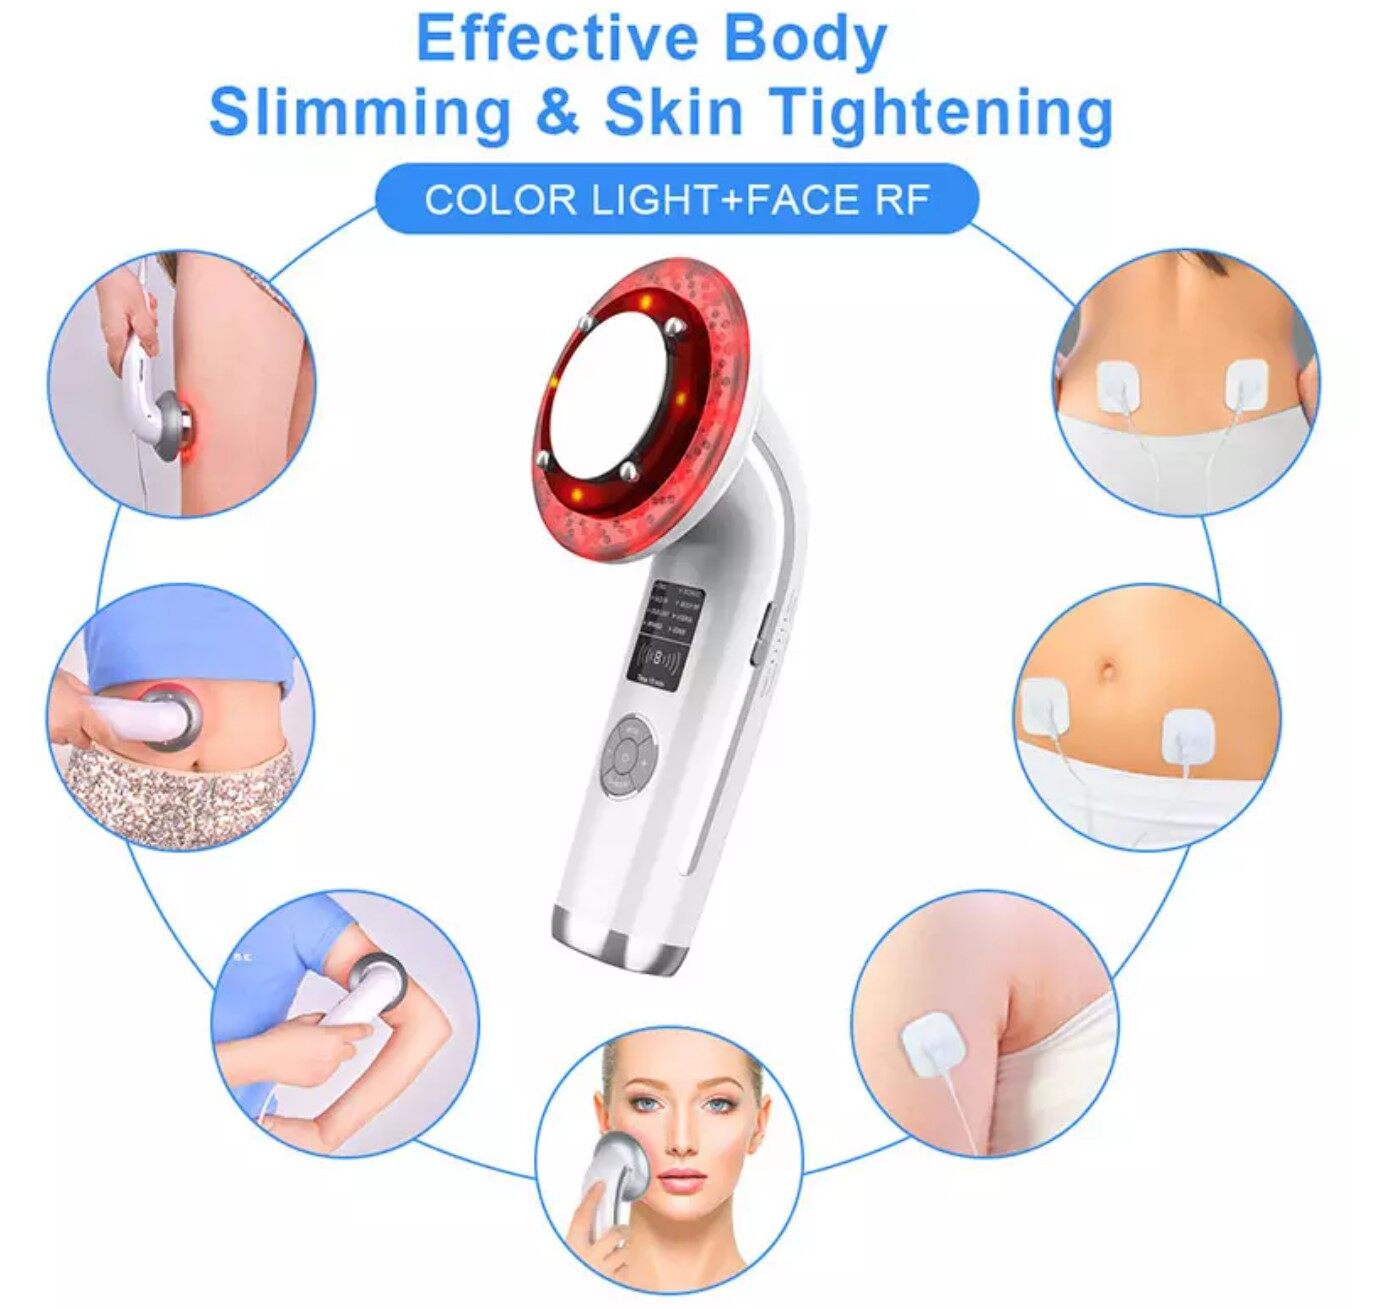 8 in 1 Slimming Device product shown.jpg